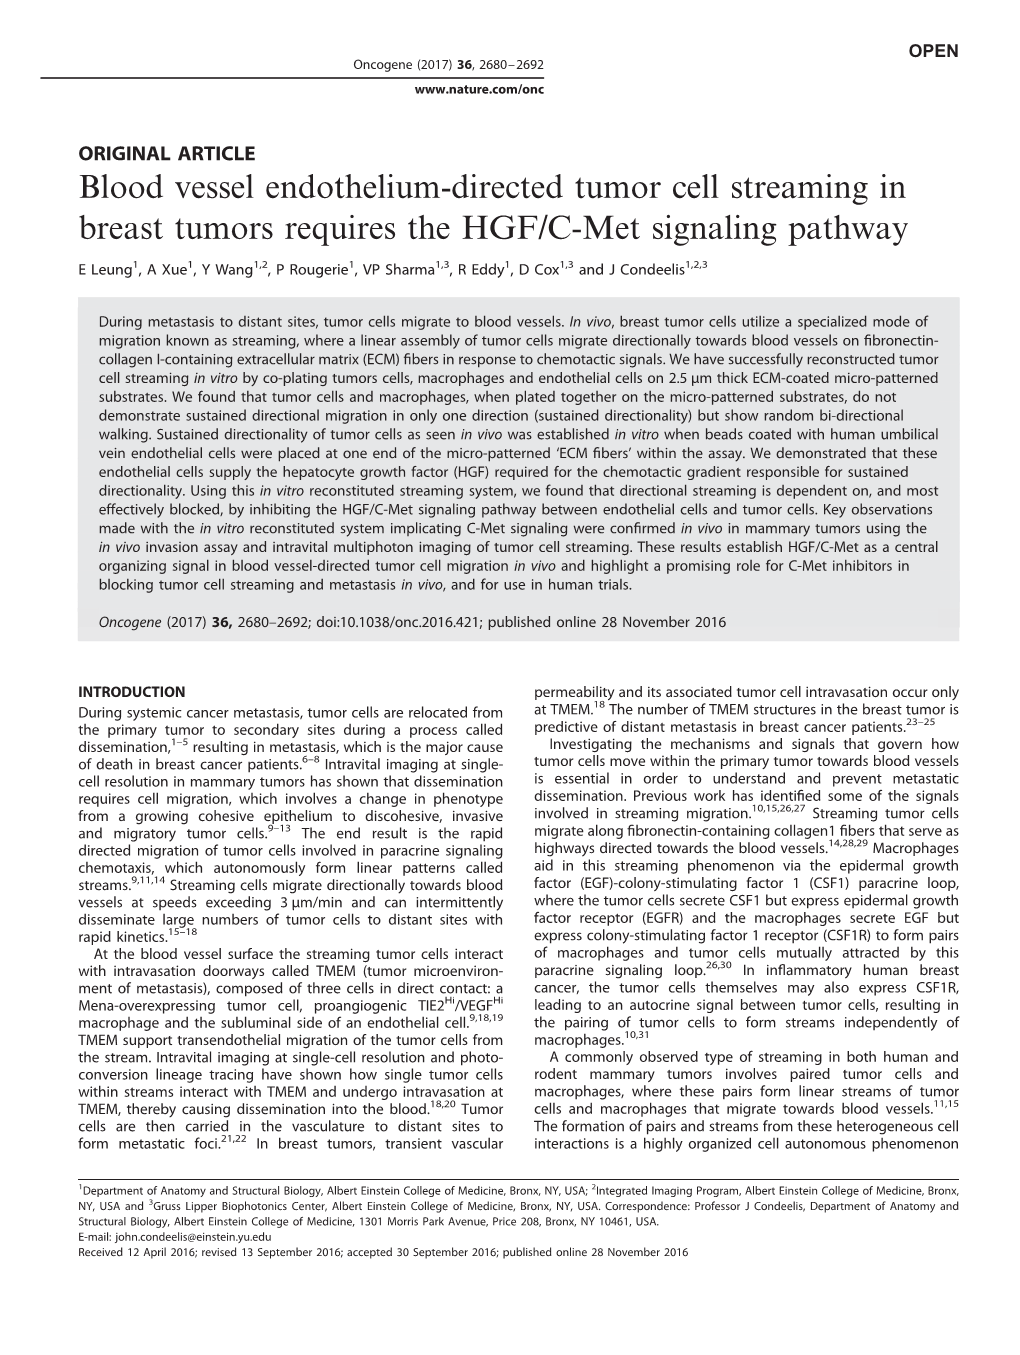 Blood Vessel Endothelium-Directed Tumor Cell Streaming in Breast Tumors Requires the HGF/C-Met Signaling Pathway